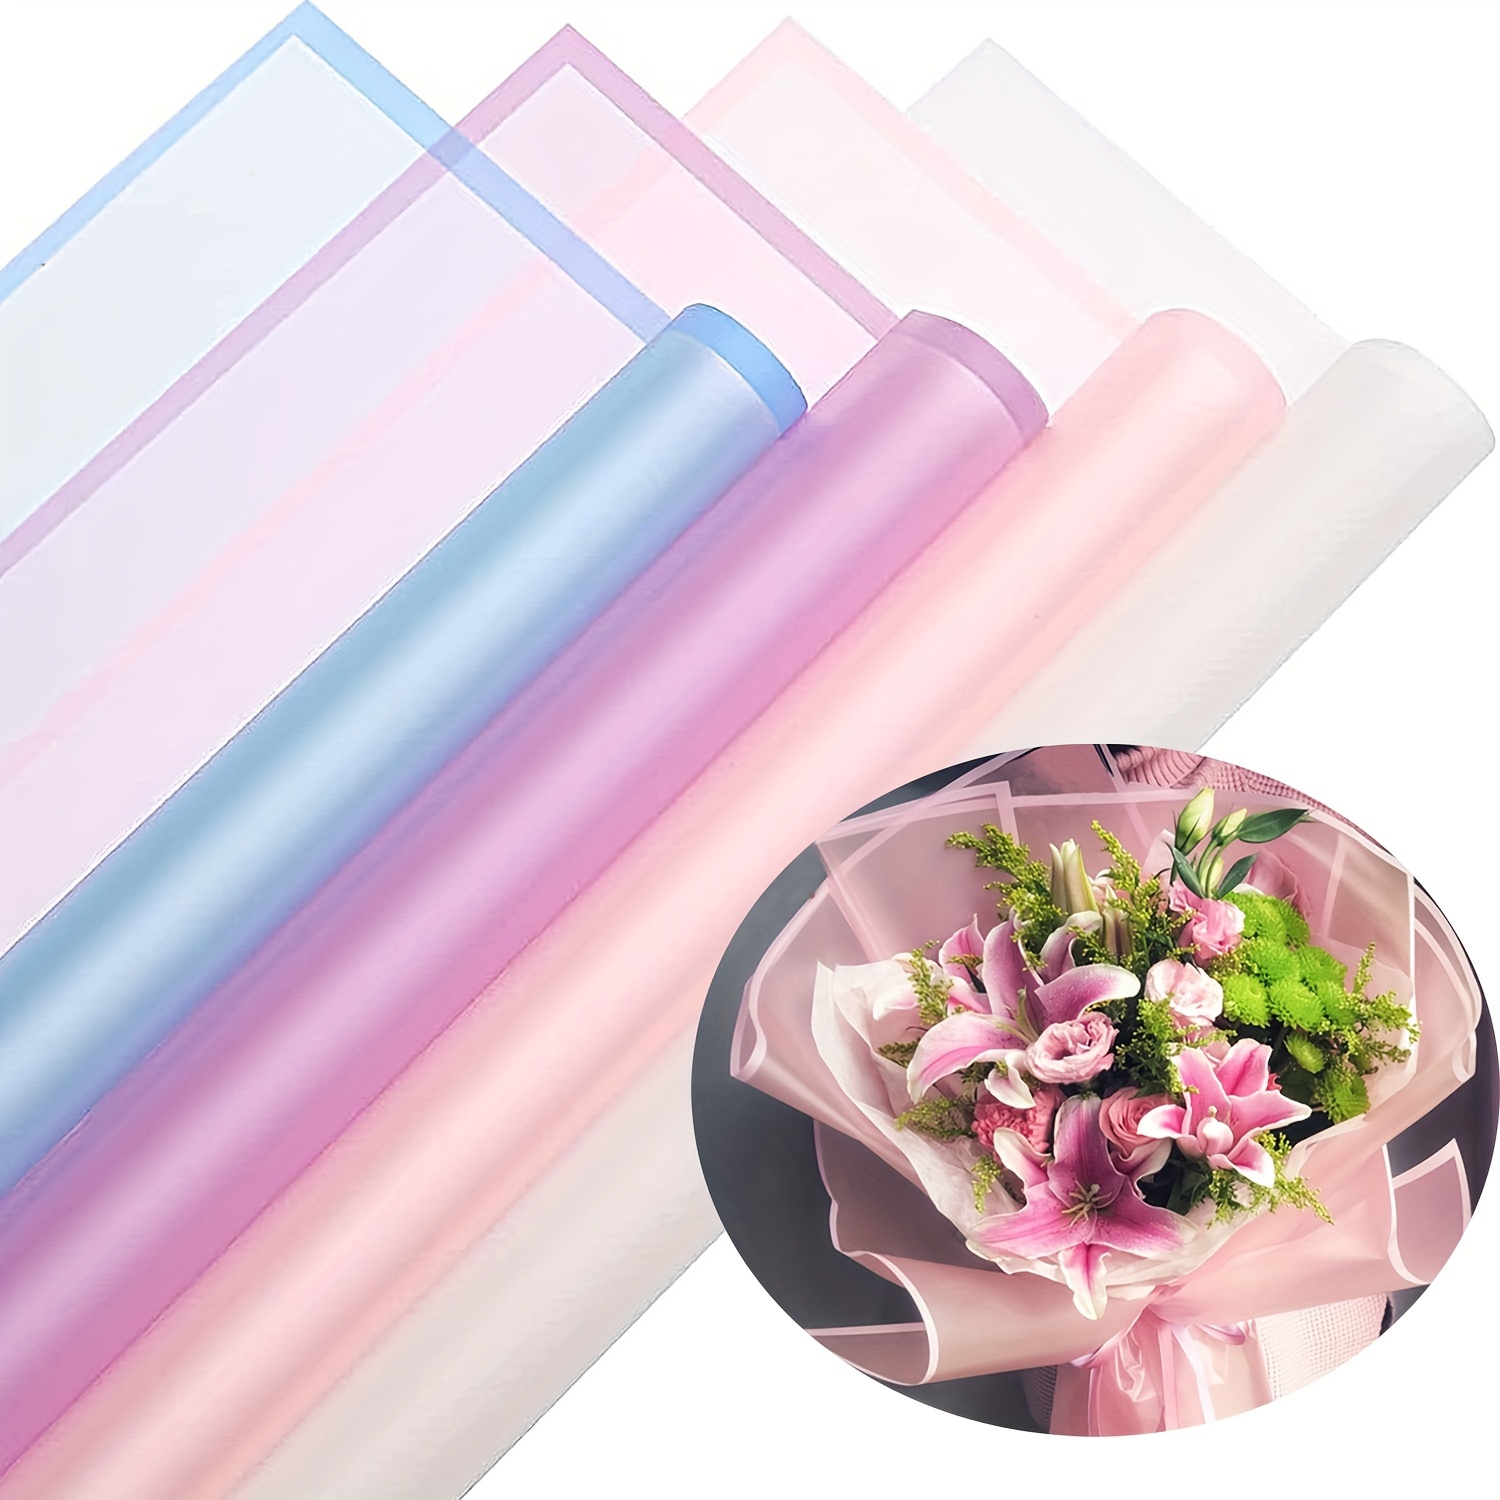 20 Sheets Frosted Flower Wrapping Papers Bouquet Film Translucent  Waterproof DIY